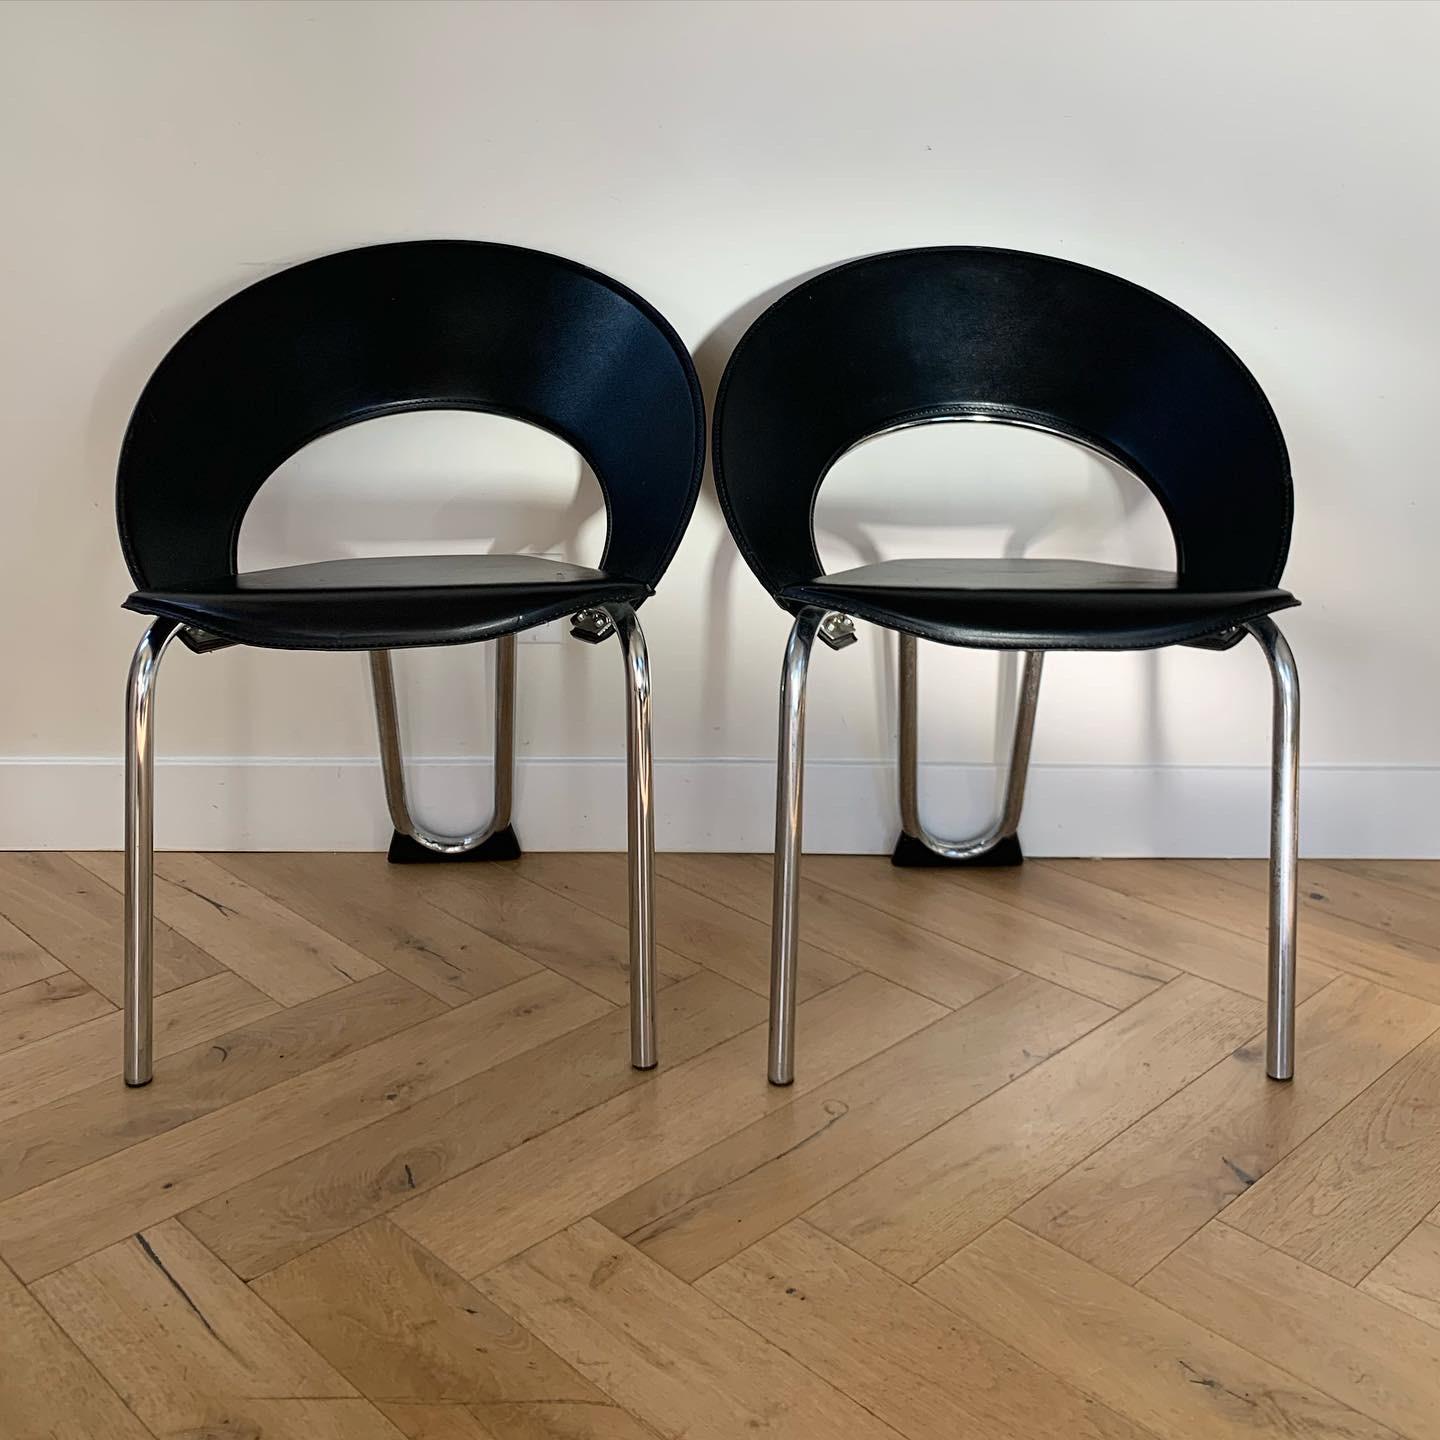 A pair of black leather and chrome Bahauas occasional chairs with thick tubular chrome frames and fanned out backs. Wear consistent with age but overall fab.

Measures: 24” W x 22.5” D x 30” H
Seat: width tapers from 19.5” to 9” x 17.5” depth x 19”